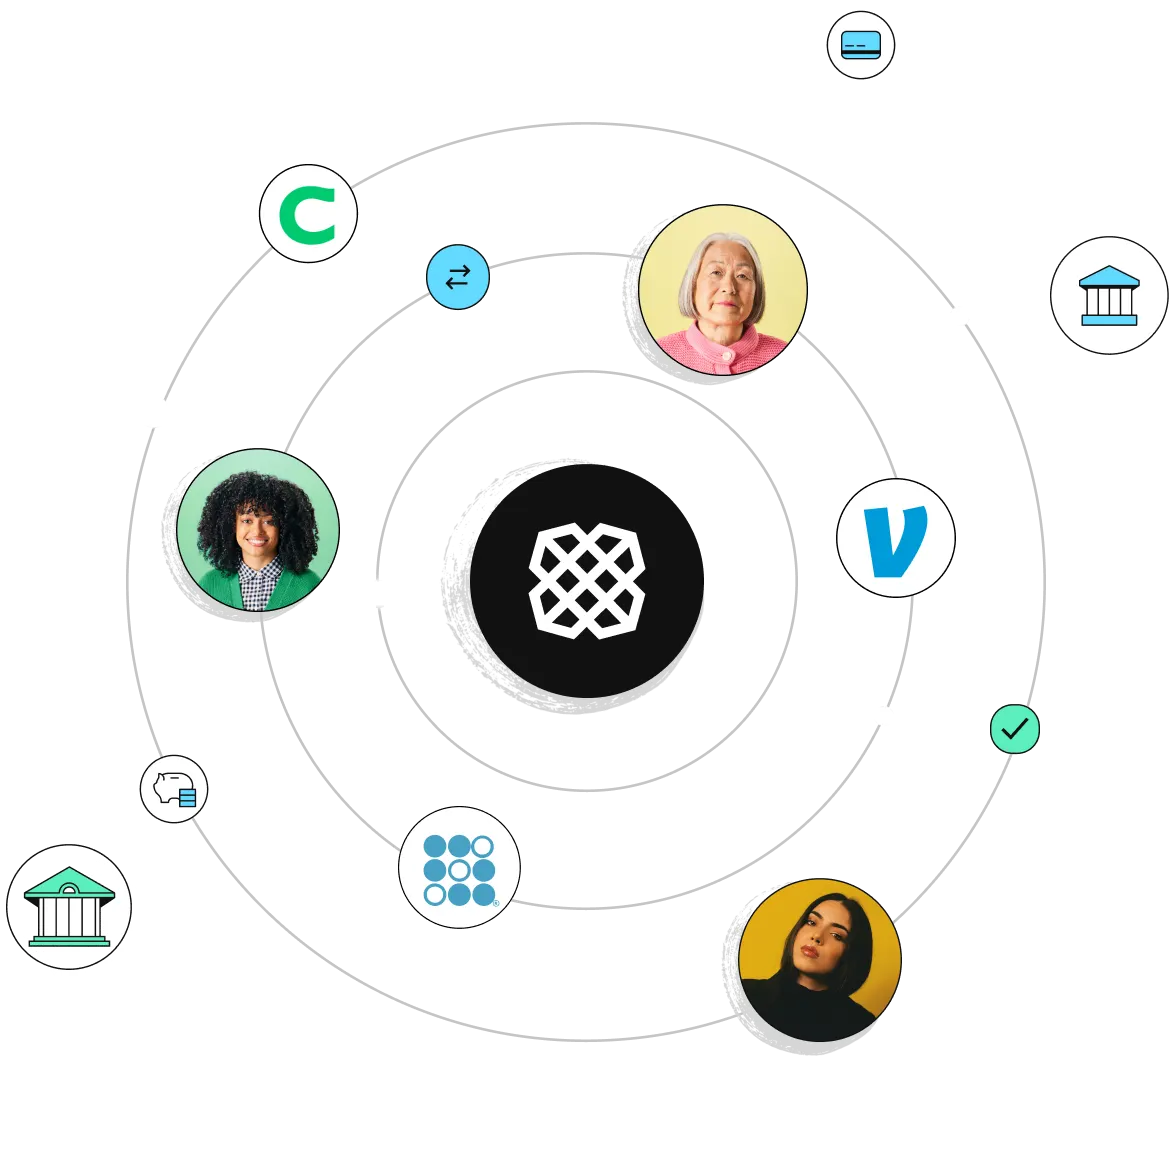 A digital network visualization, showcasing interconnected icons and three diverse user portraits, symbolizing global connectivity.